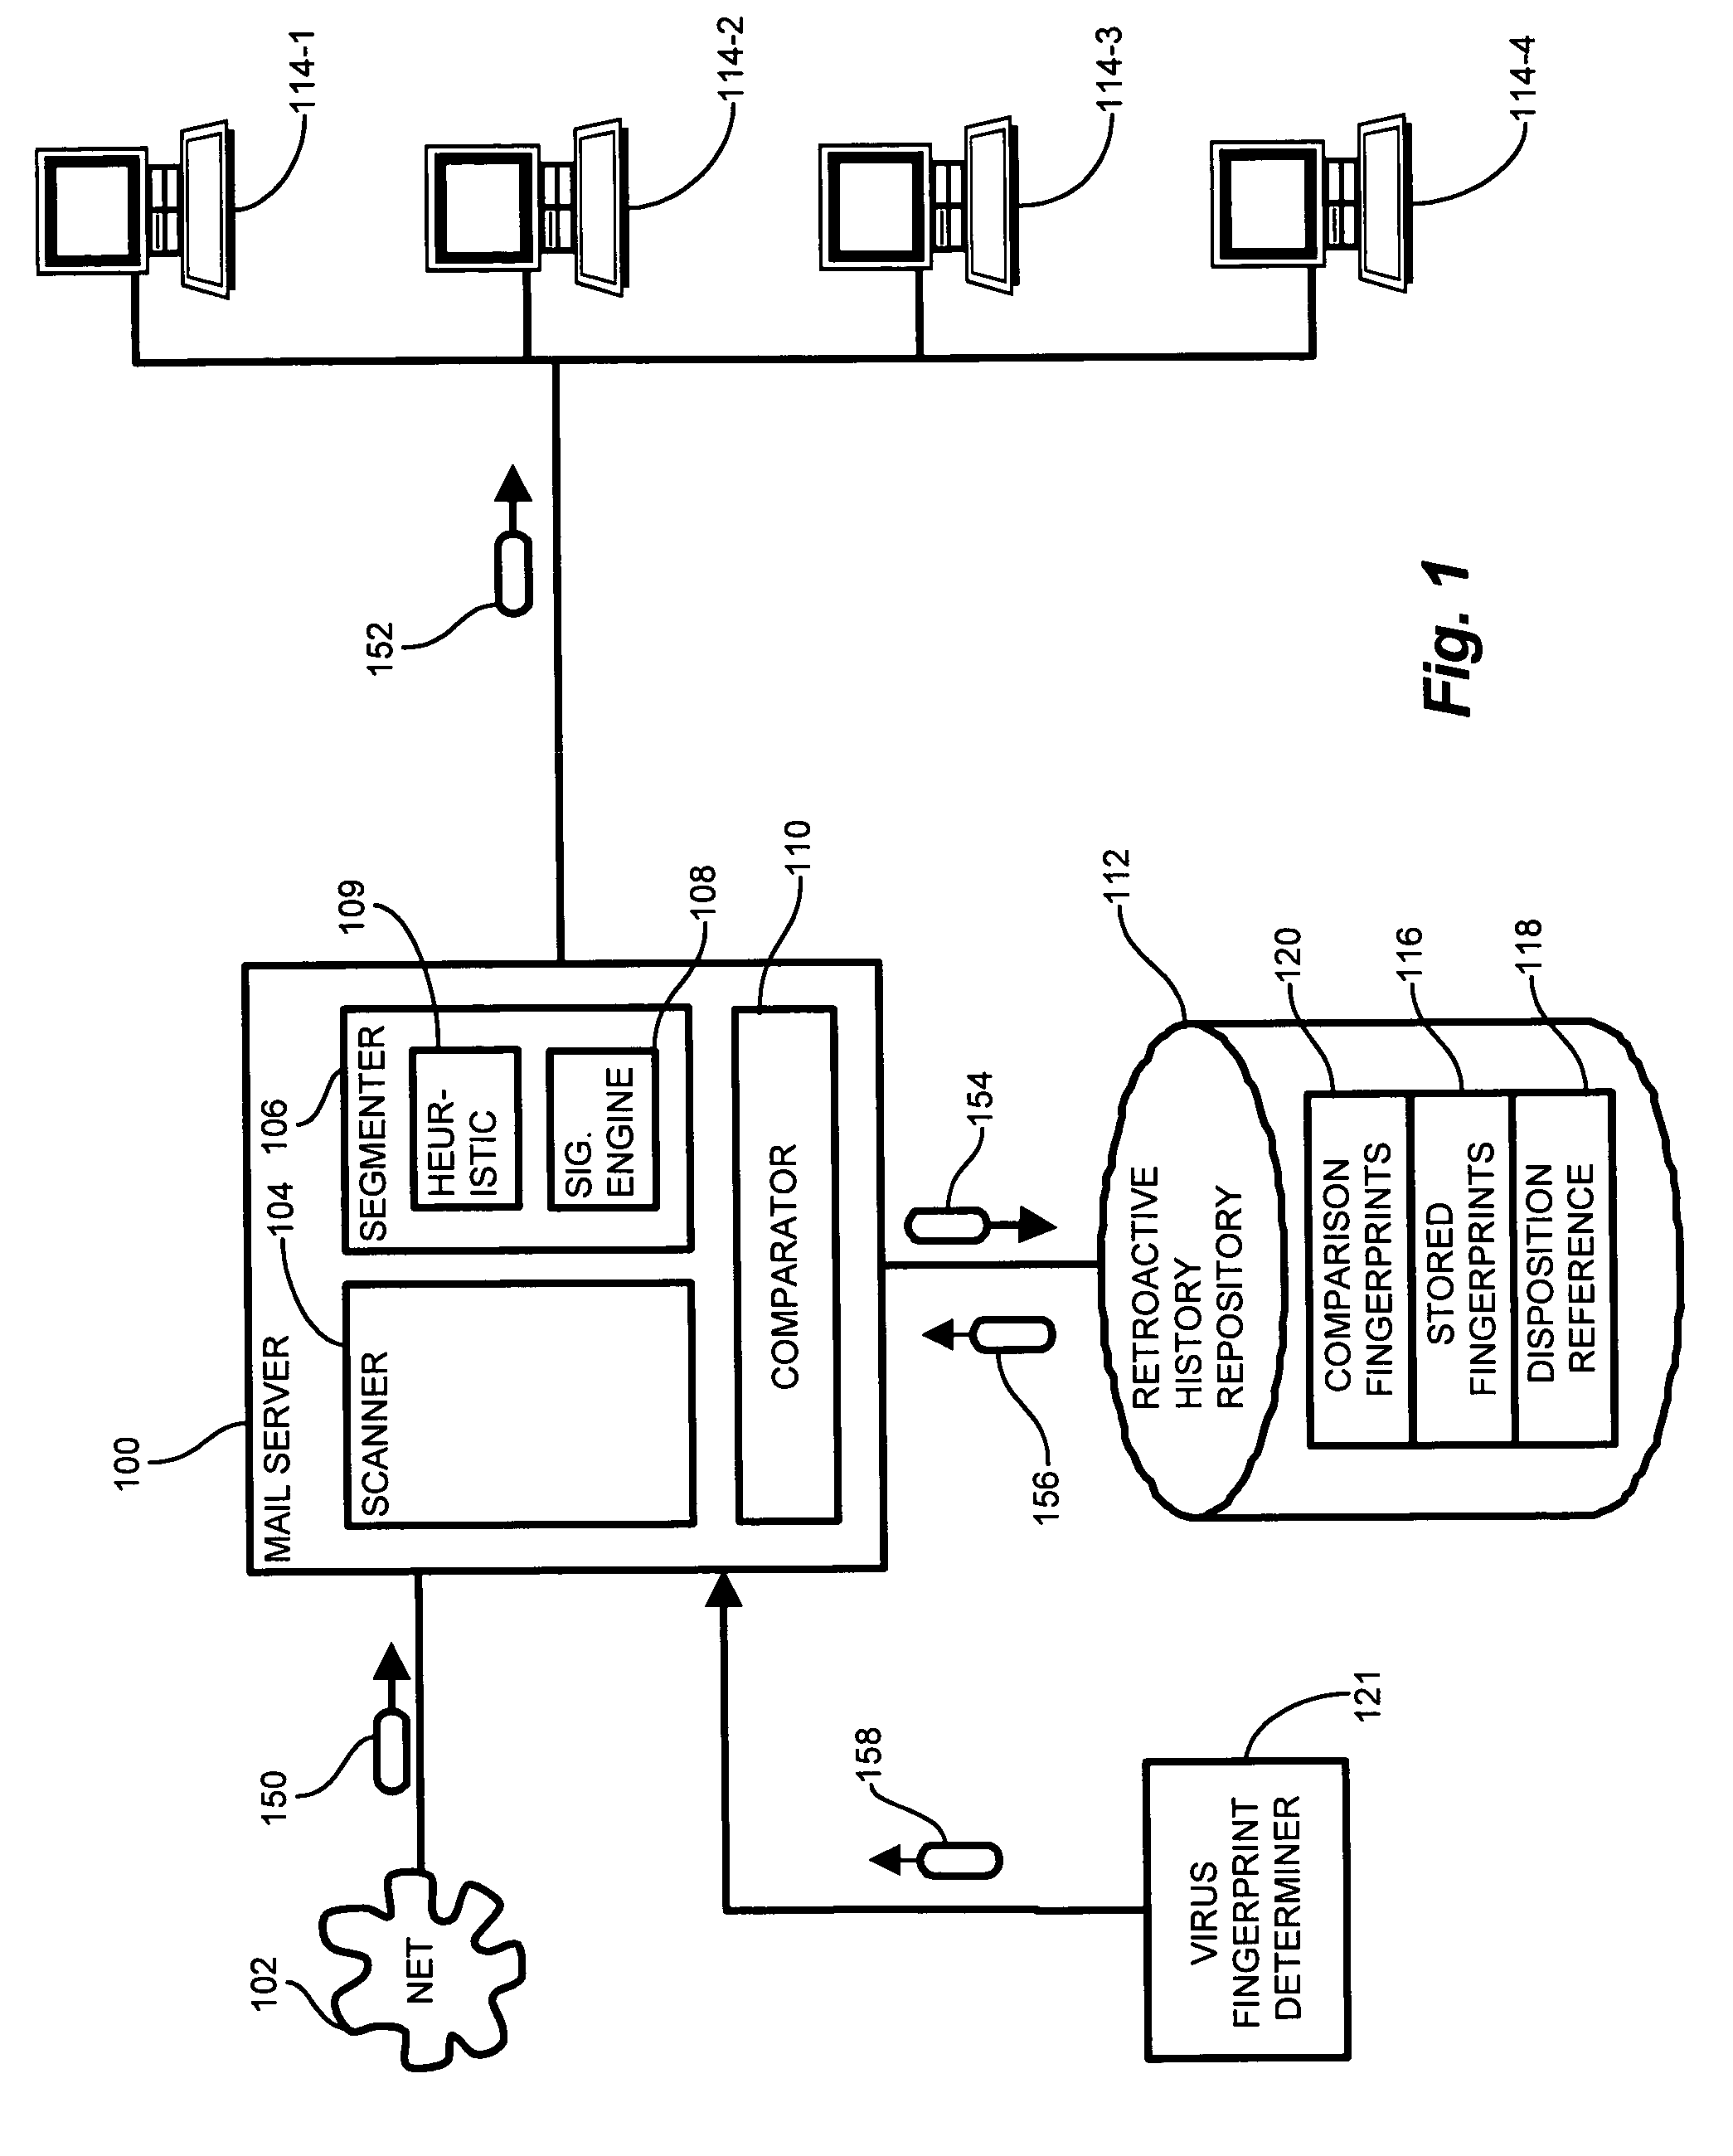 System and method for identifying message propagation